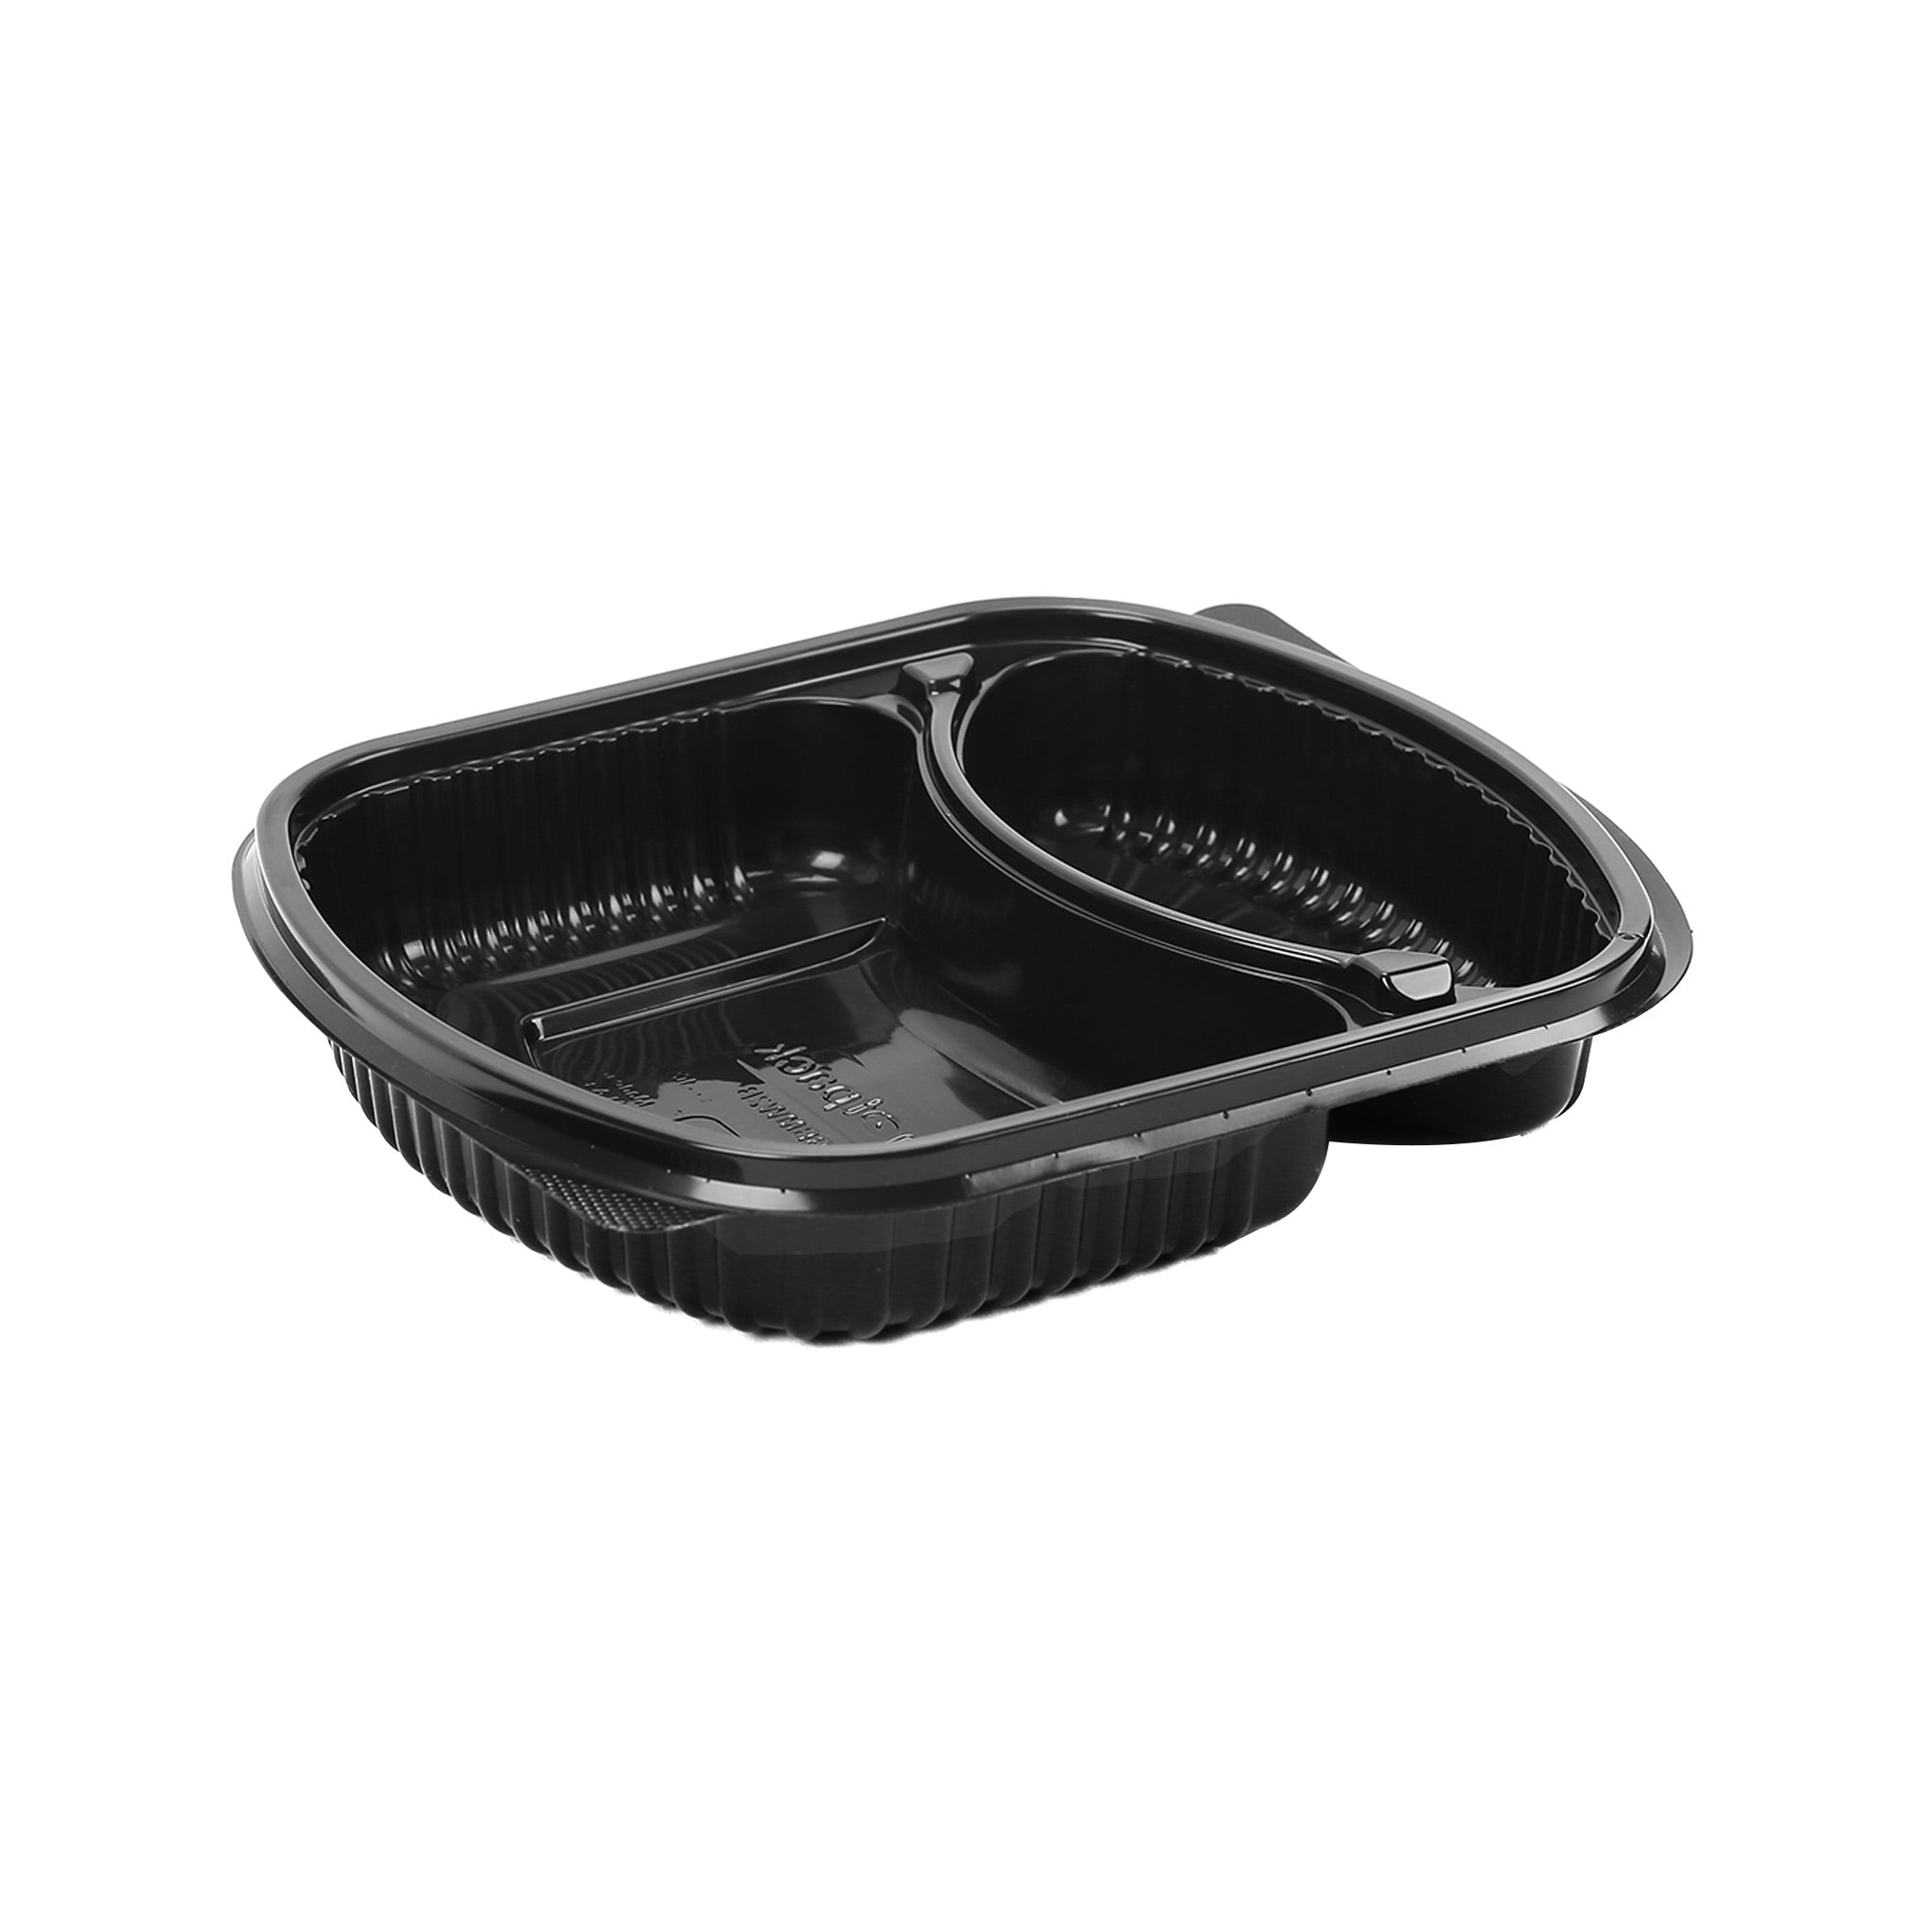 250 Pieces Black Base Rectangular 2-Compartment Container Base + Lid